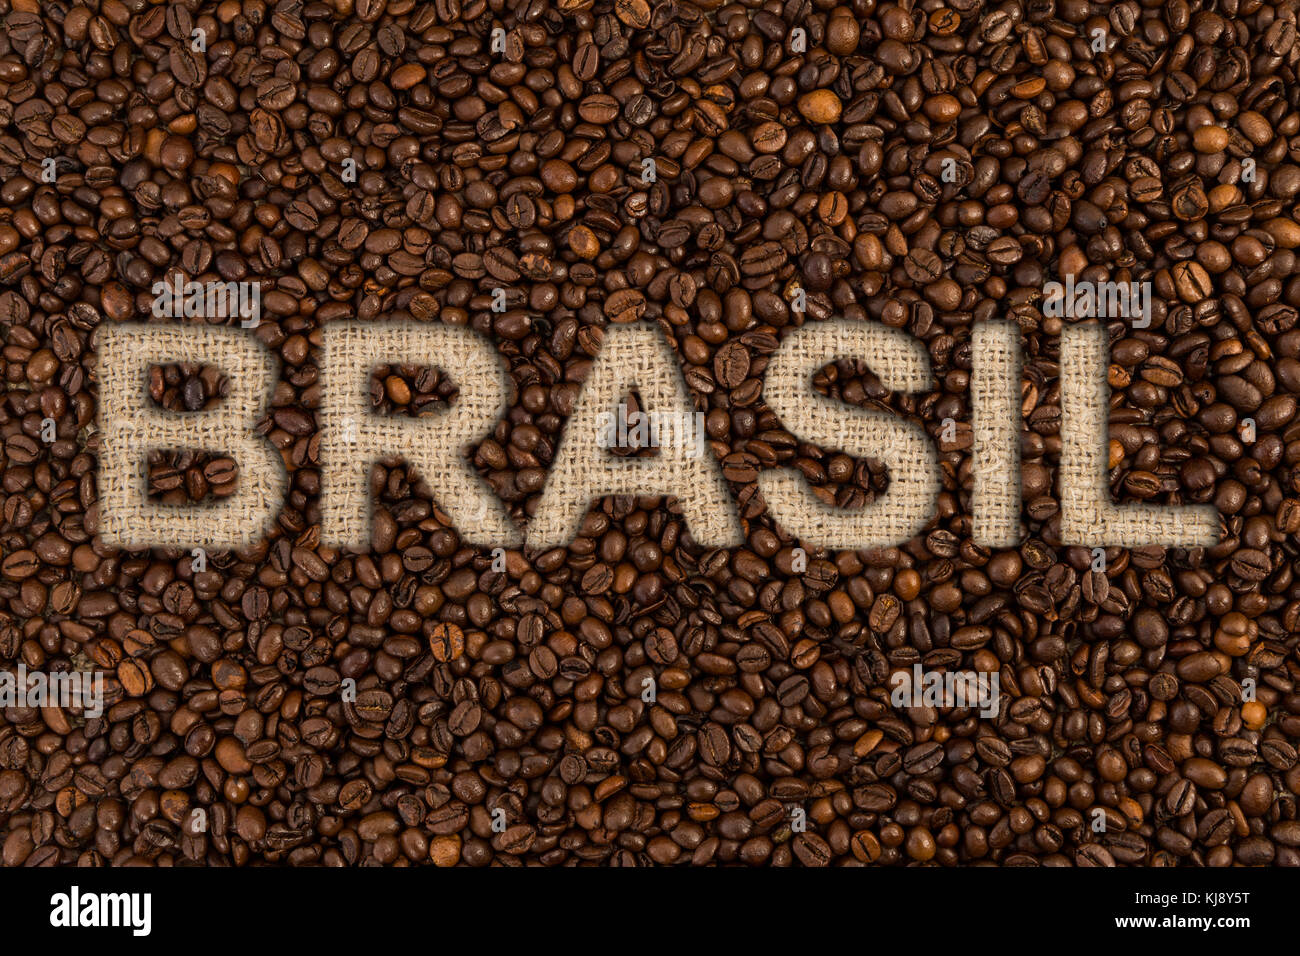 Brasil coffee concept text on roasted beans and jute fabric as high quality country origin Stock Photo